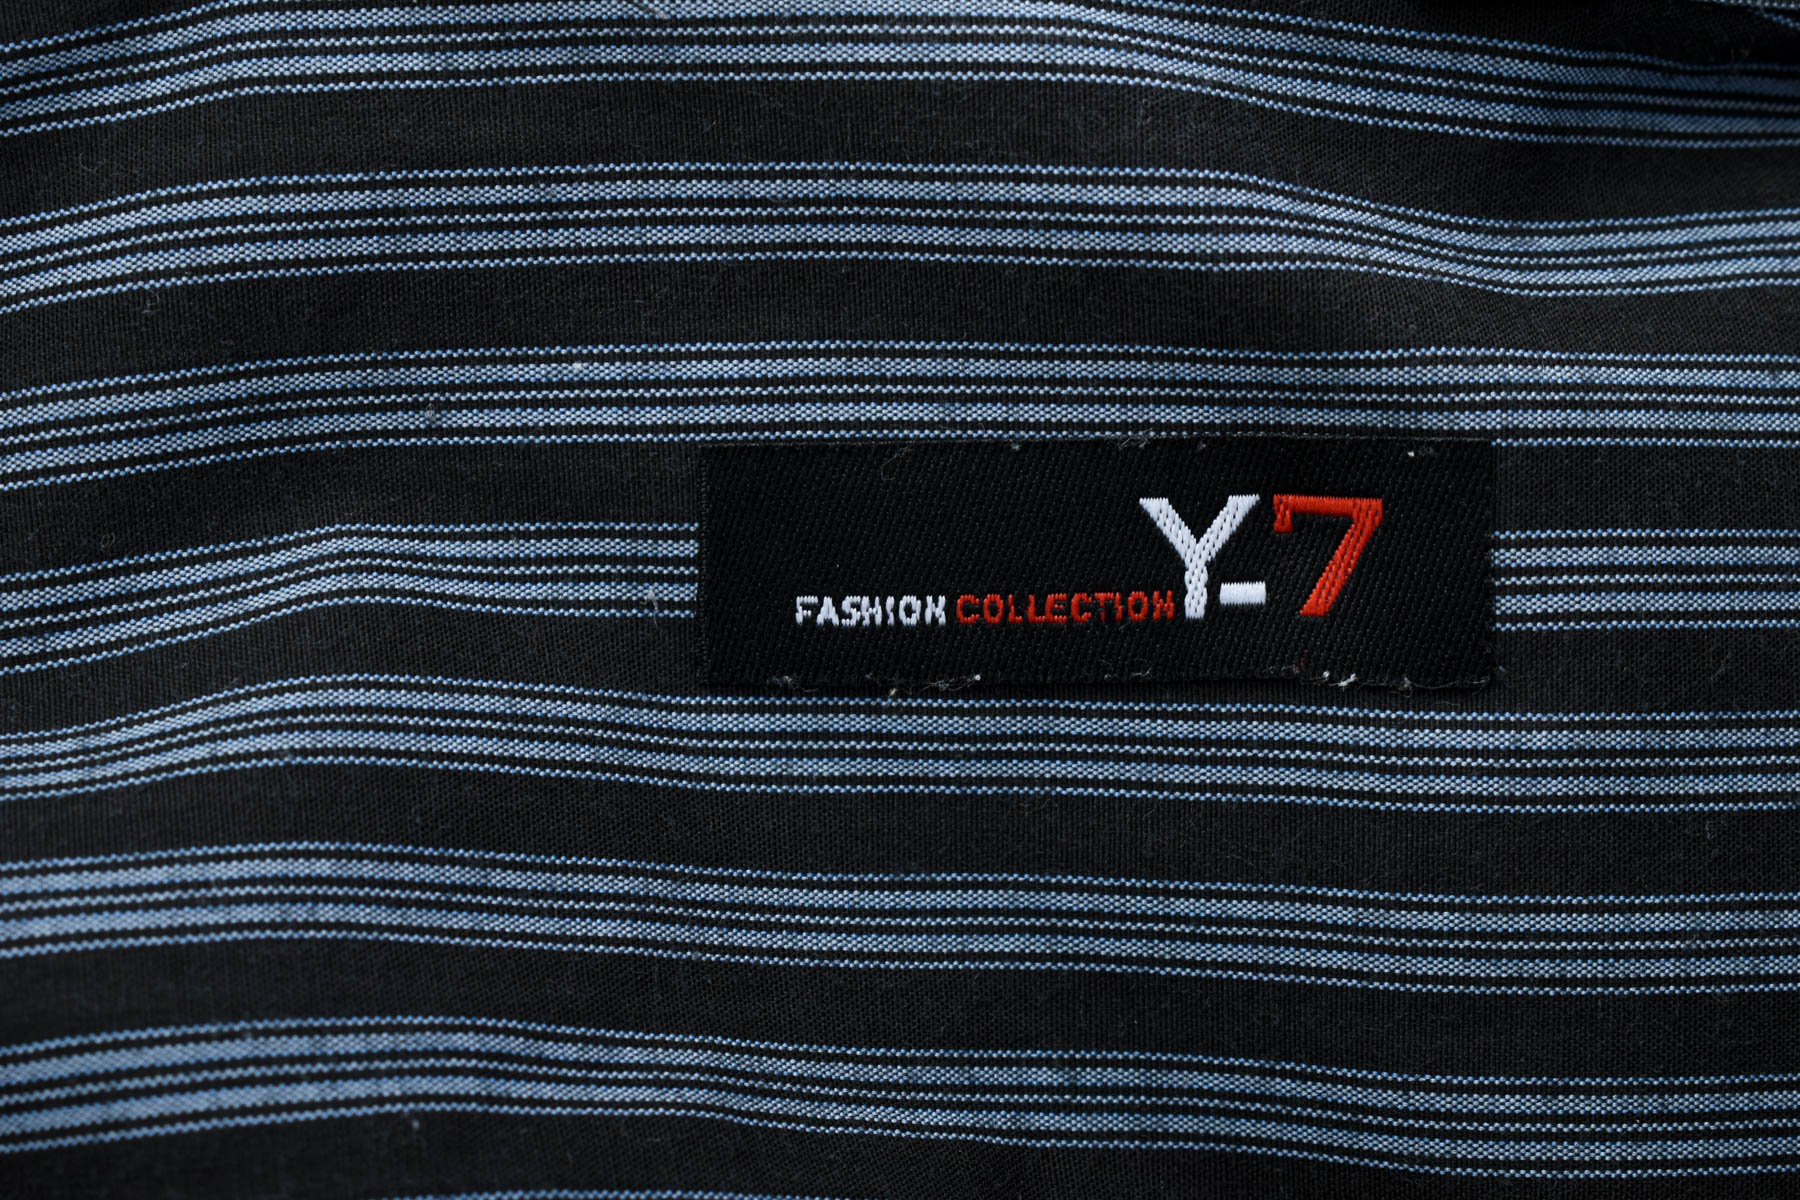 Men's shirt - Fashion Collection Y7 - 2